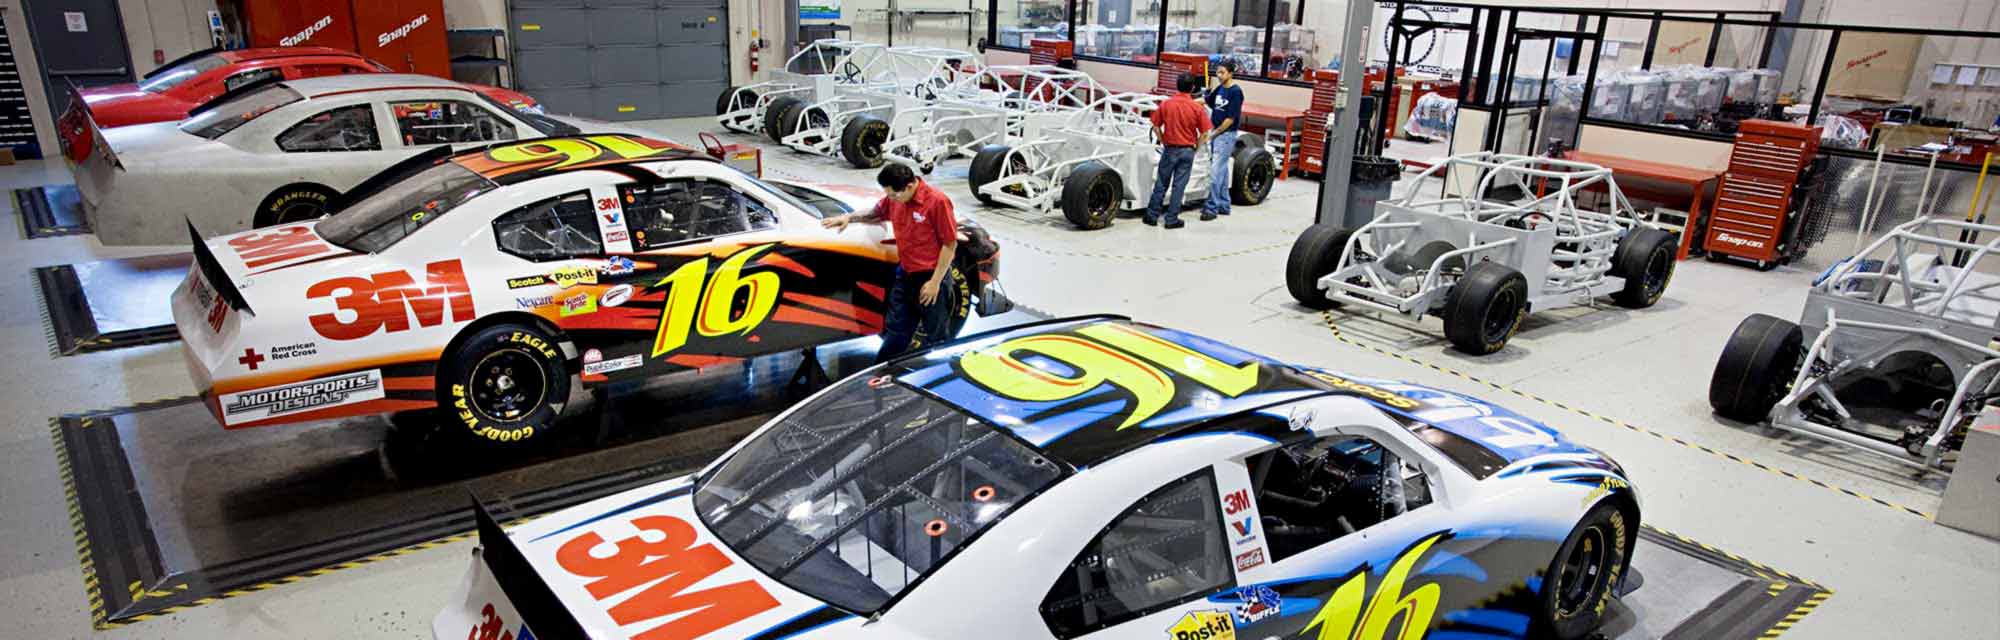 NASCAR-Technical-Institute interior garage with racecars